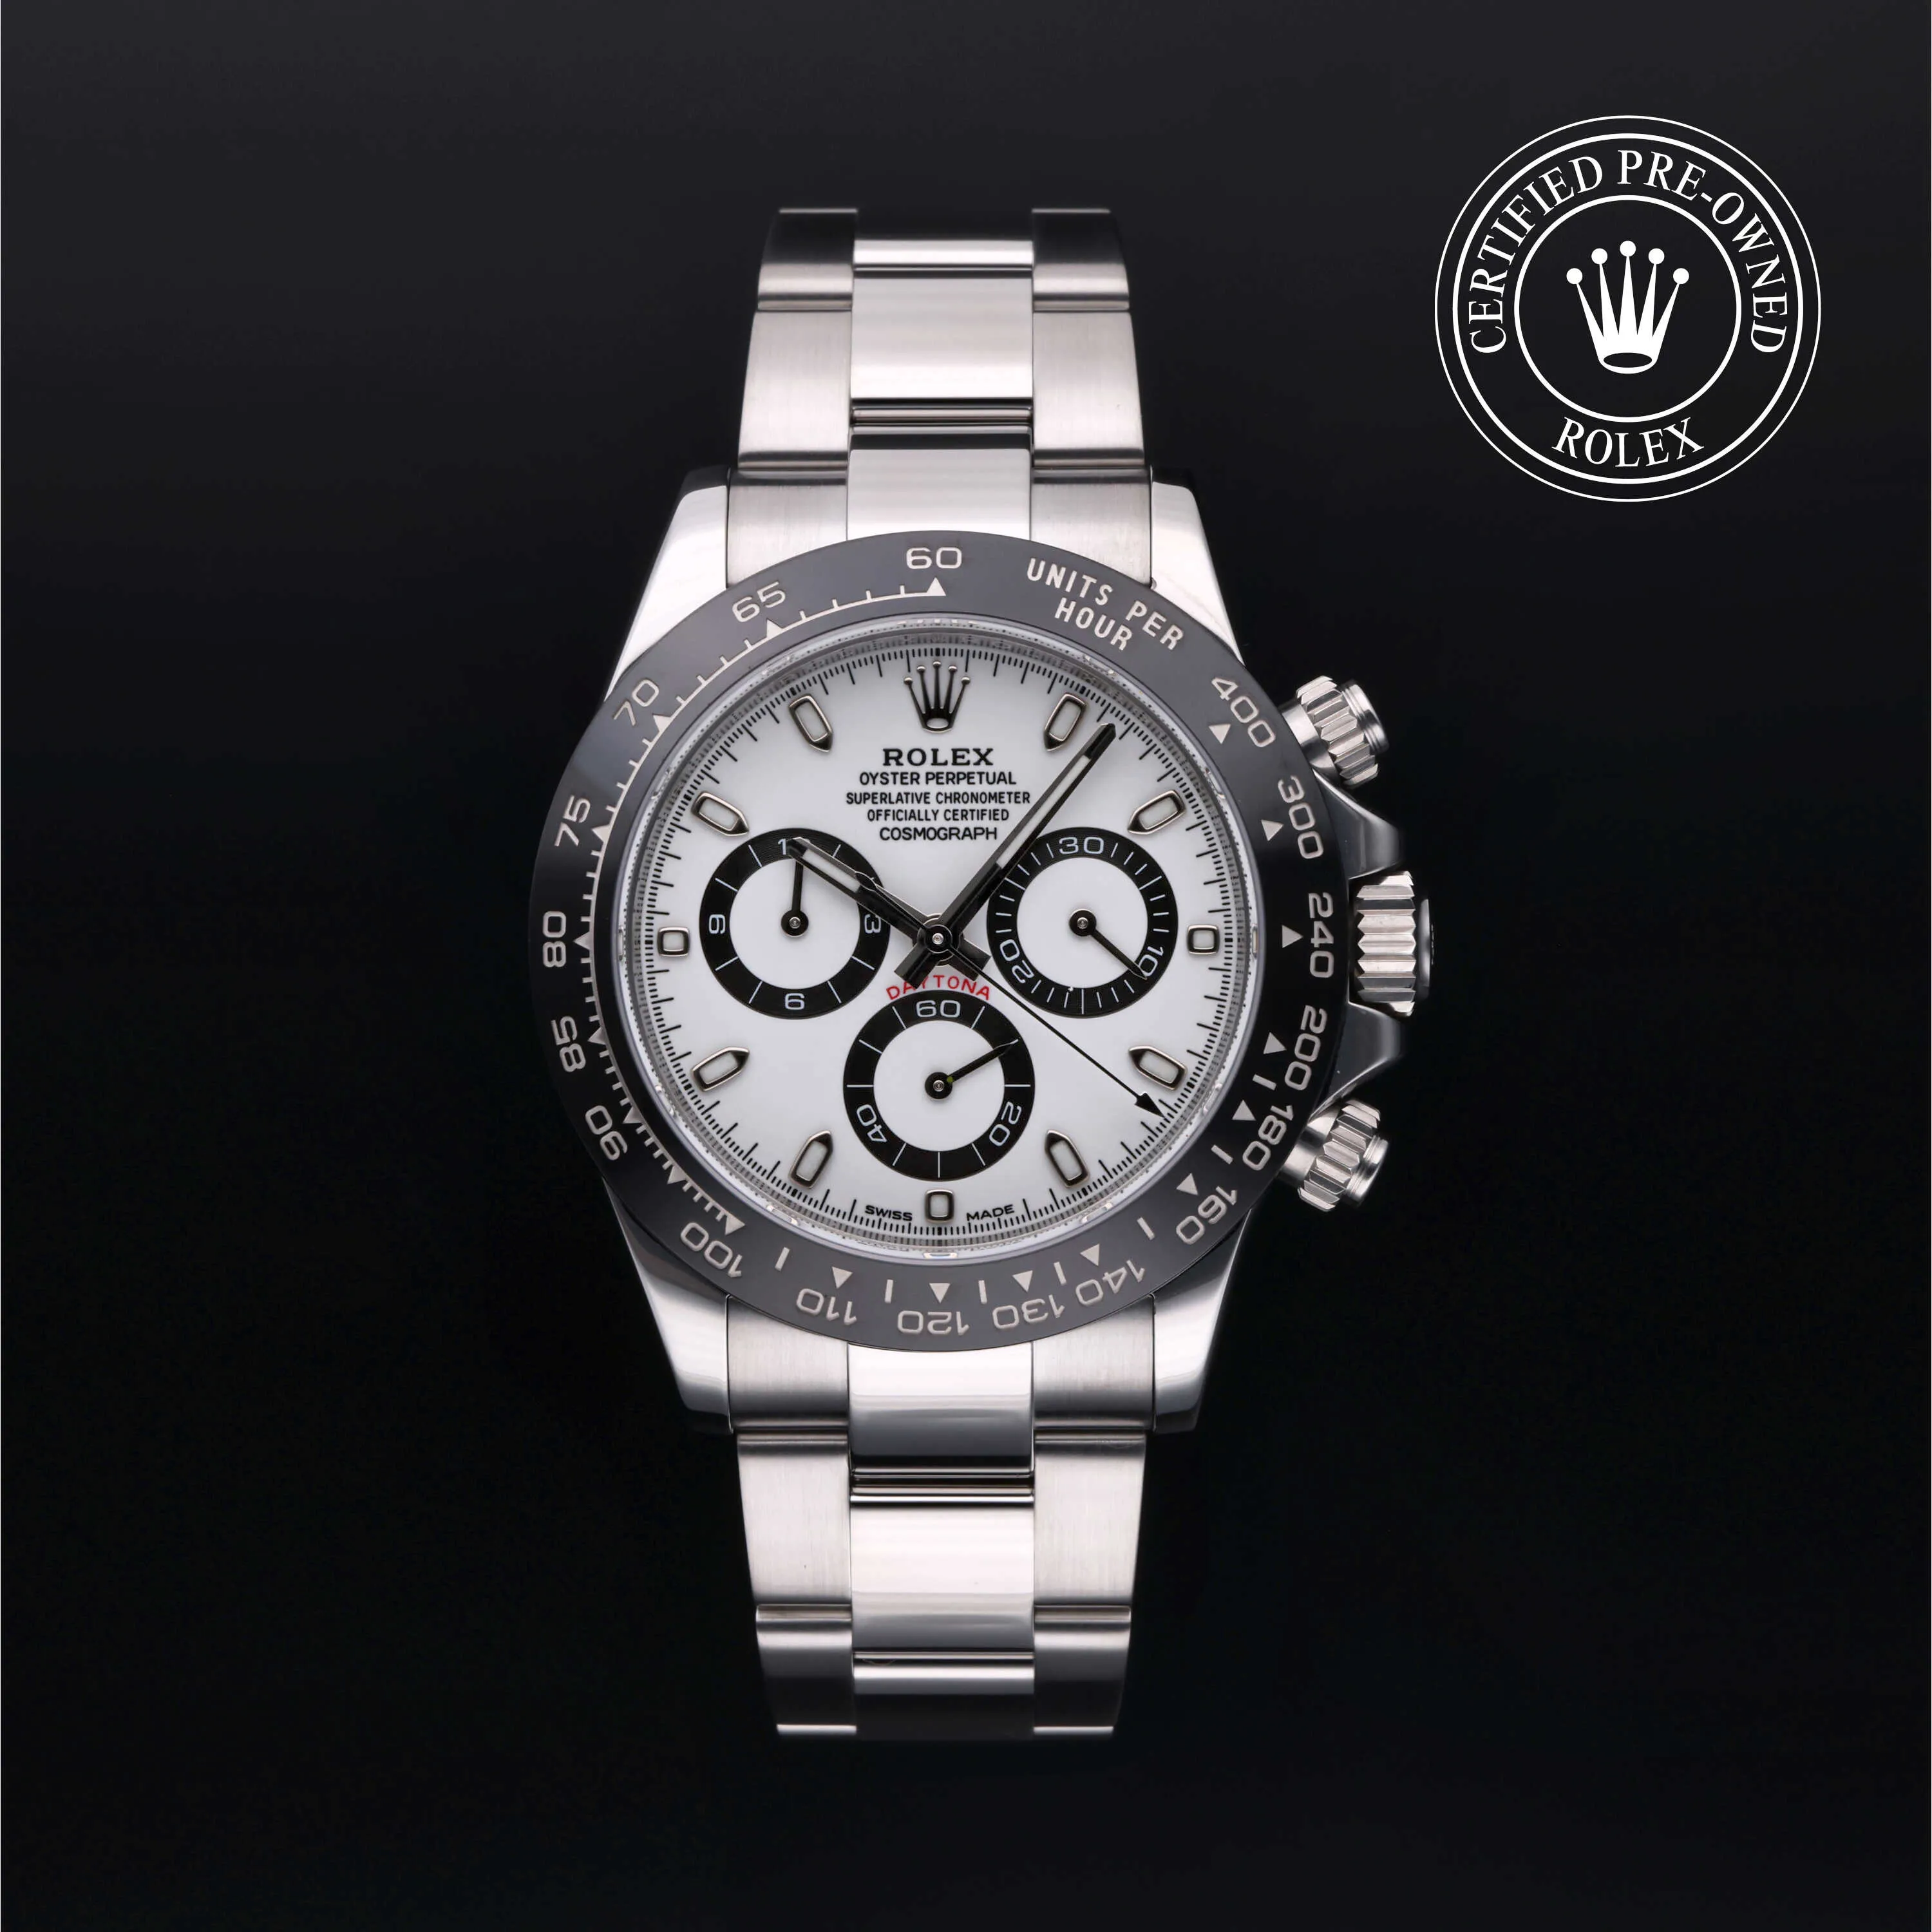 Rolex Oyster Perpetual "Cosmograph Daytona" M116500LN-0001 40mm Stainless steel White